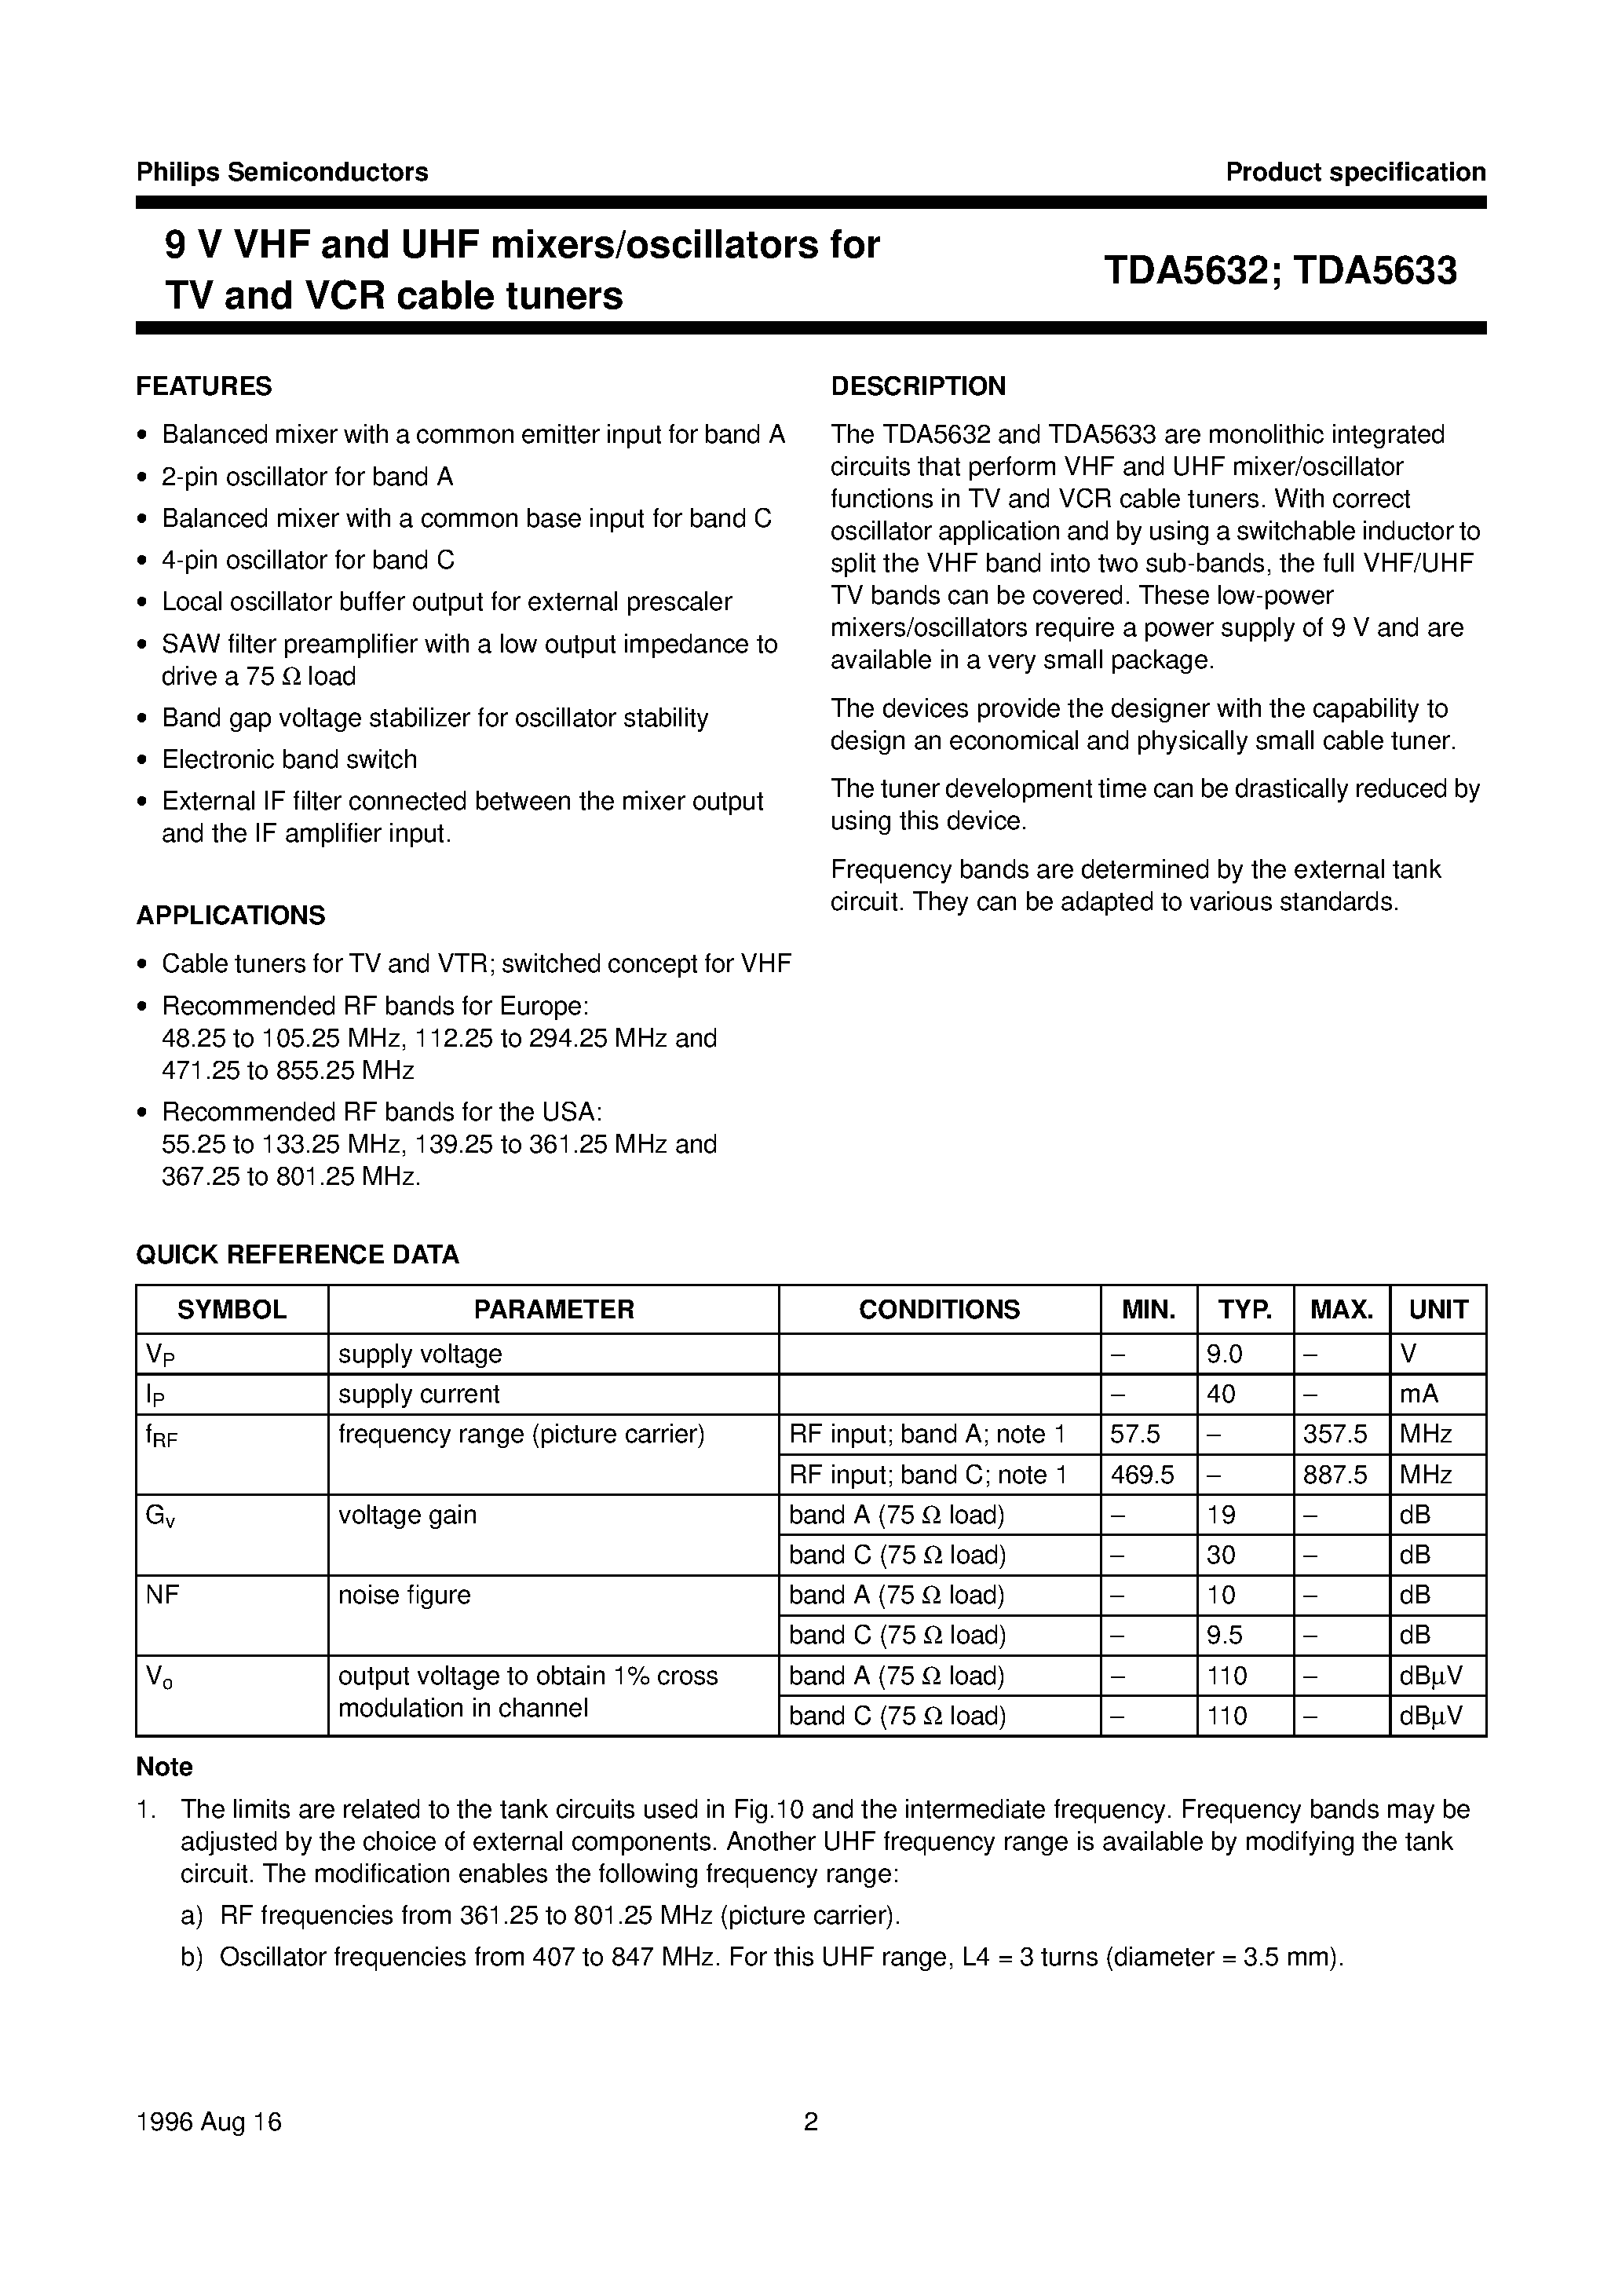 Datasheet TDA5632M - 9 V VHF and UHF mixers/oscillators for TV and VCR cable tuners page 2